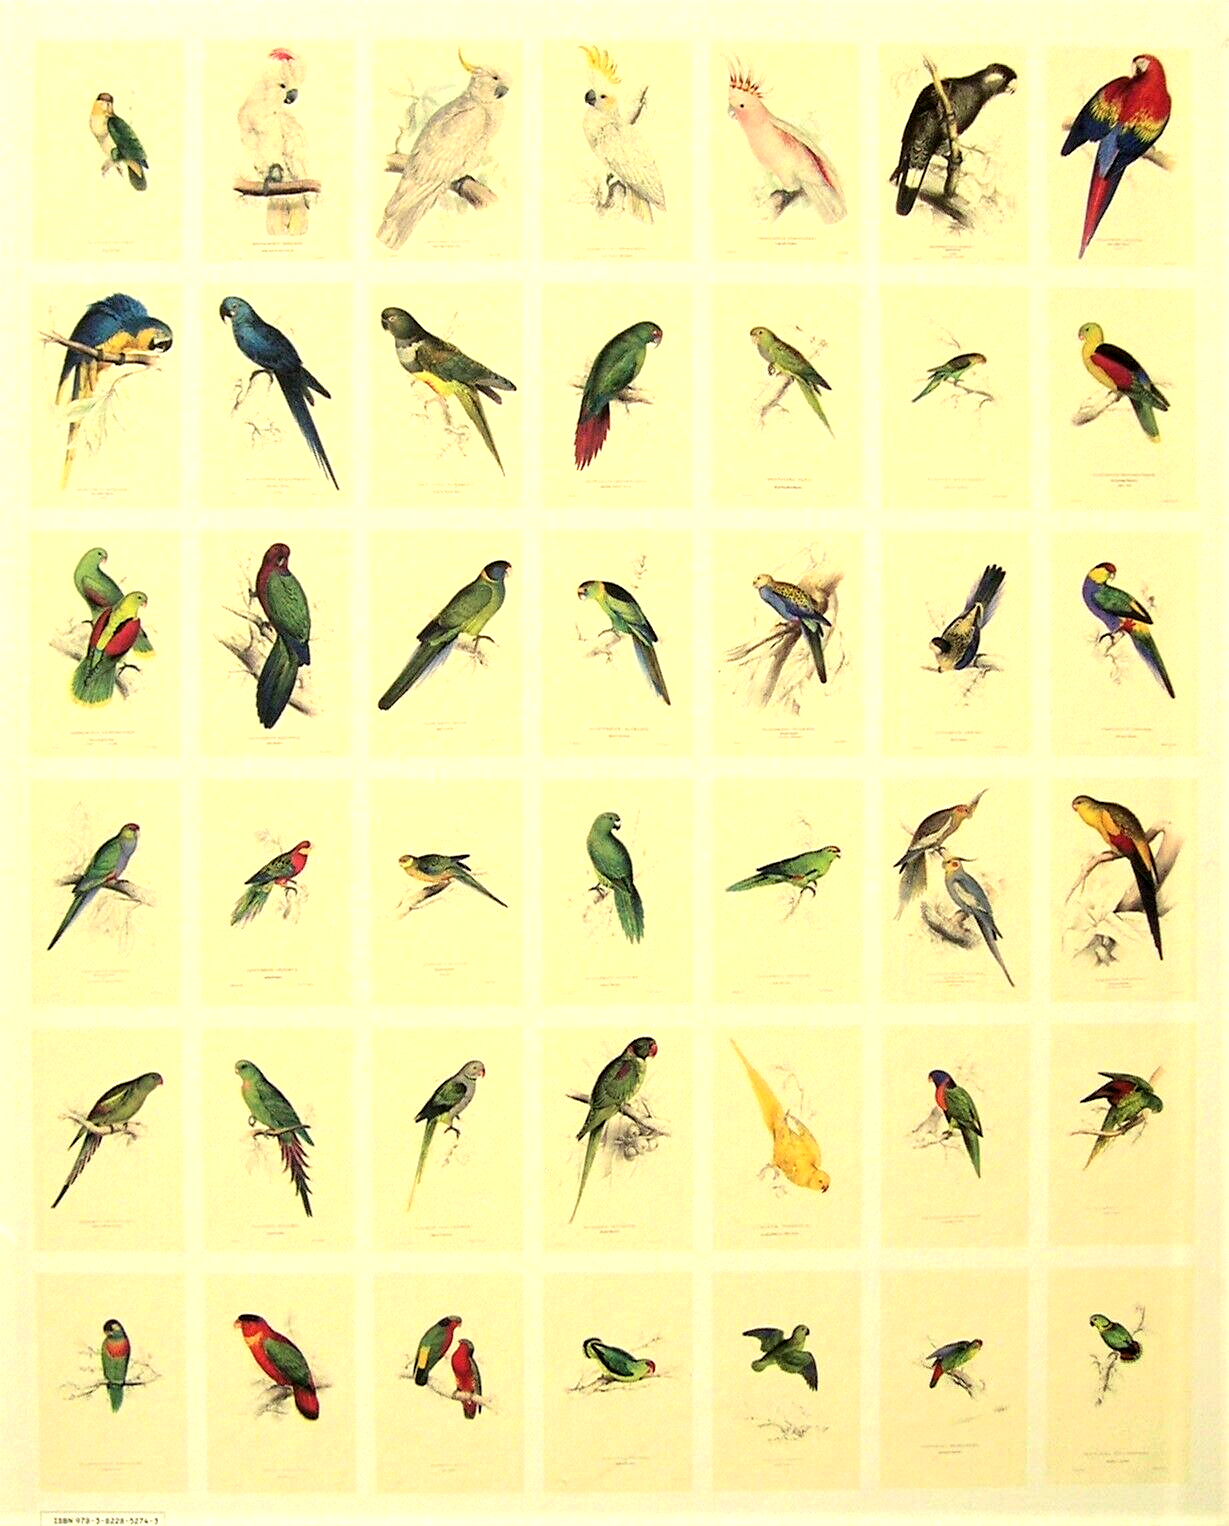 42 Lear Parrot Prints; The Complete Set Directly From His Original 1832 Folio Без бренда - фотография #21